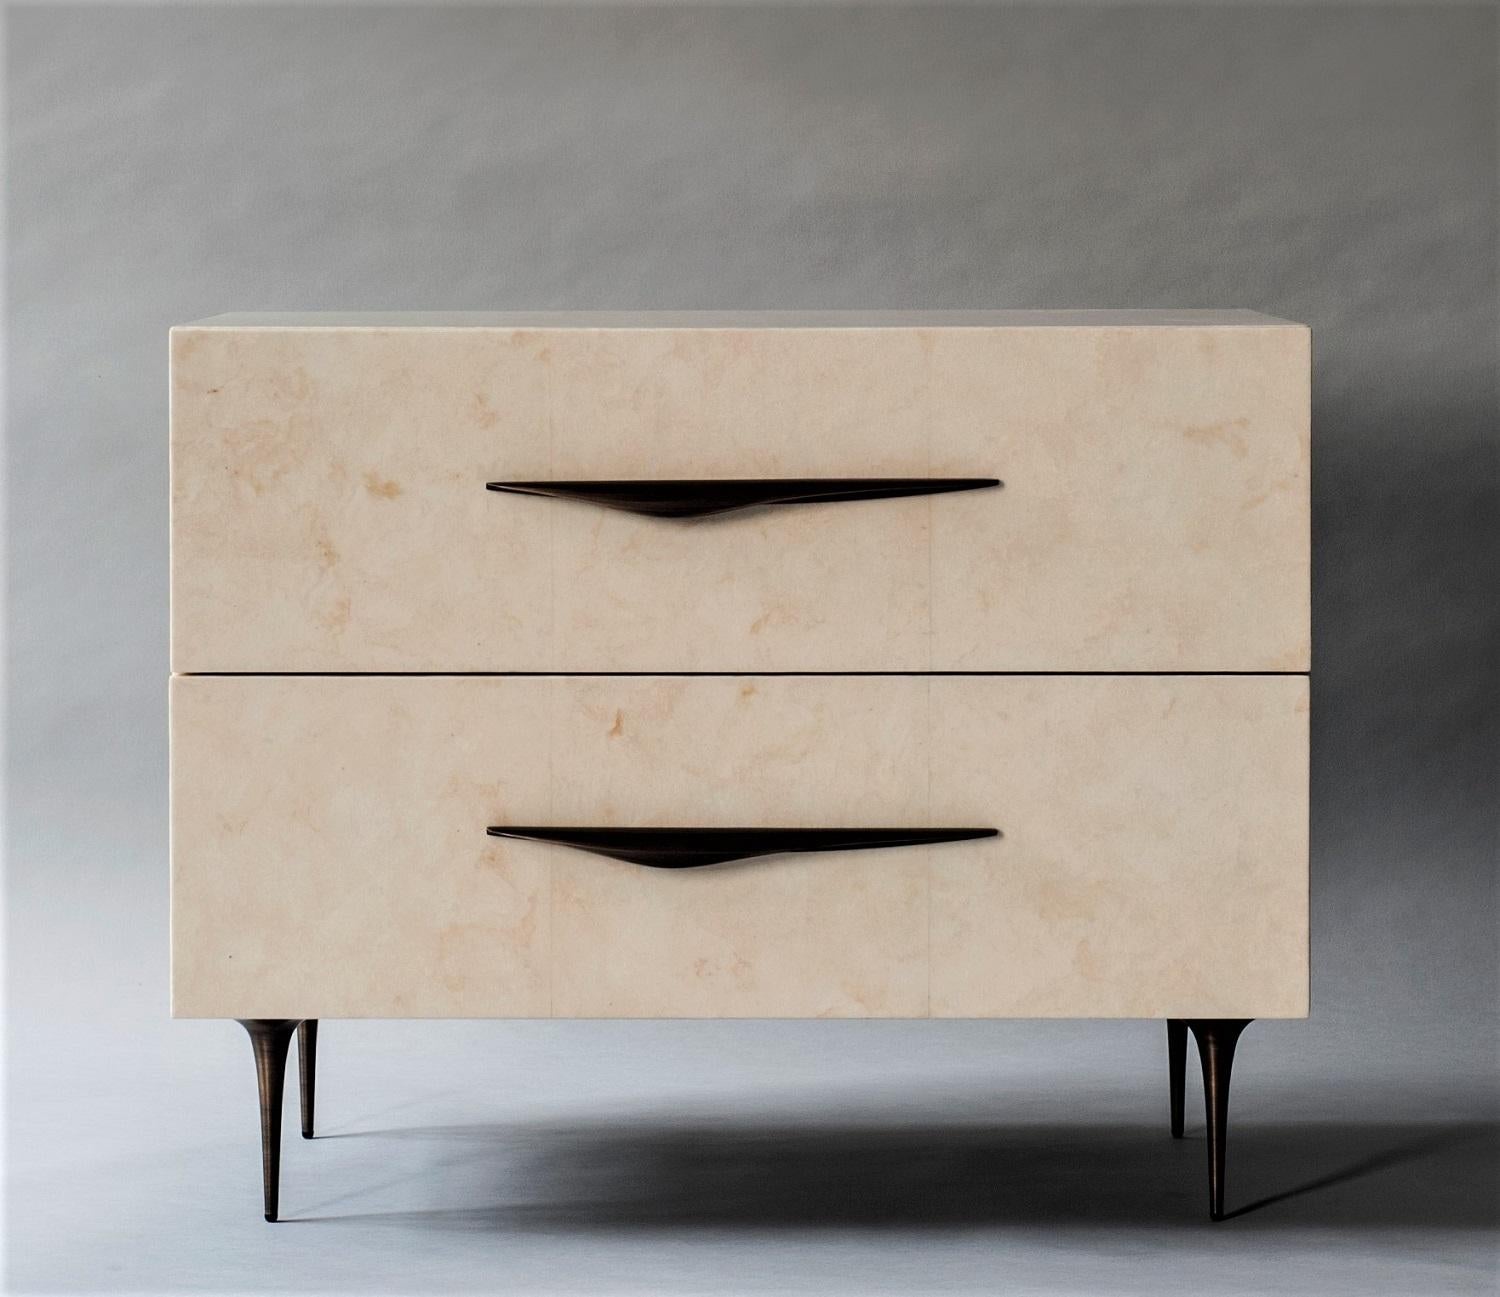 Antwerp bedside table by DeMuro Das 
Dimensions: W 76.2 x D 47.1 x H 61 cm
Materials: Carta (Ivory) - Matte 
 Solid bronze (Antique) handles and legs

Dimensions and finishes can be customized 

DeMuro Das is an international design firm and